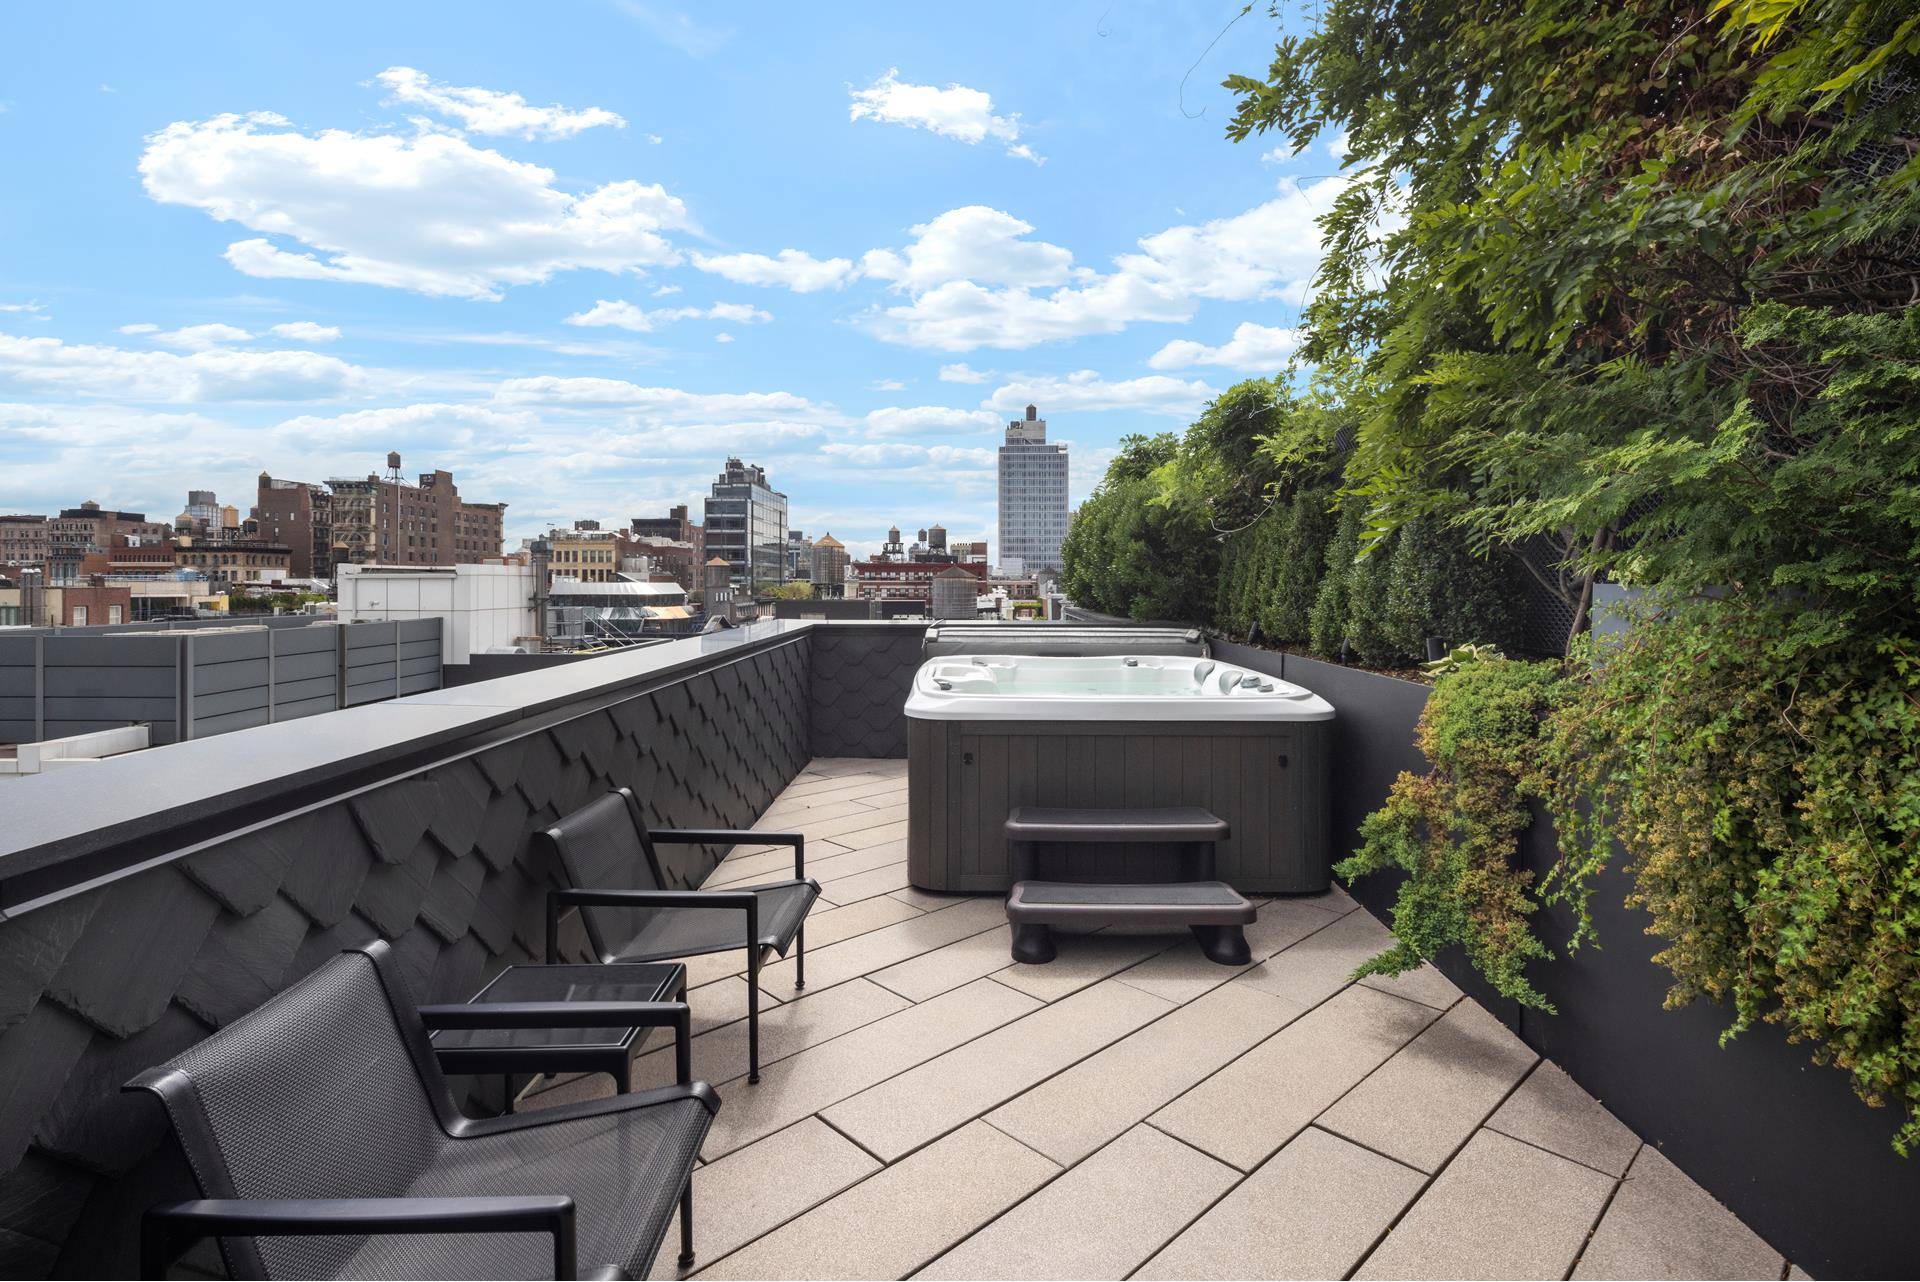 Super Mint SOHO Penthouse with Views and Terraces Offered for the first time and not to be missed, this custom renovated Penthouse has it all !